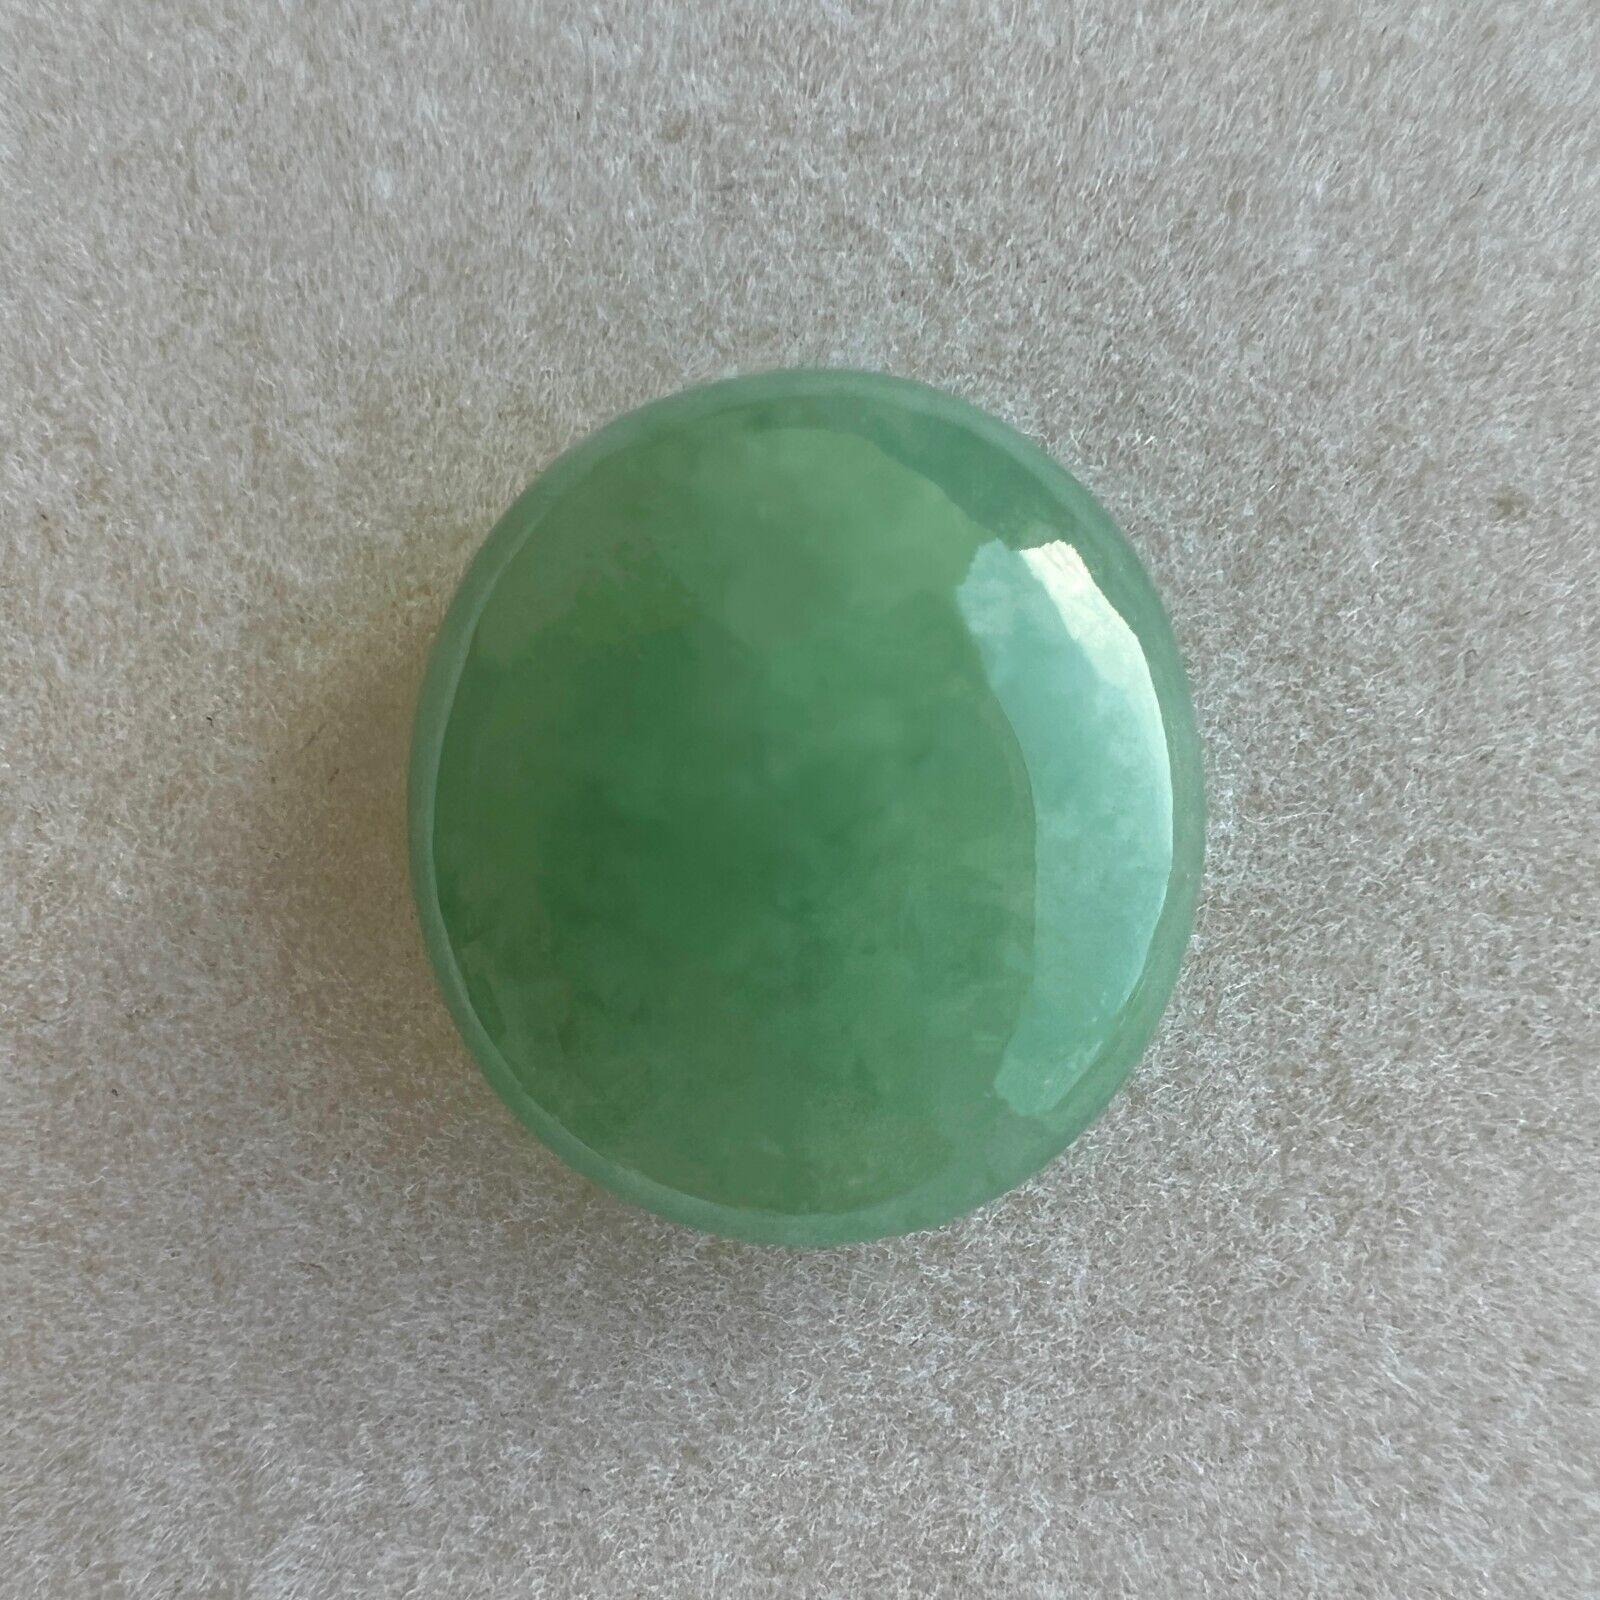 9.87ct Green Jadeite Jade IGI Certified Natural ‘A’ Grade Oval Cabochon Gem

IGI Certified Untreated A Grade Green Jadeite Gemstone.
9.87 Carat with an excellent oval cabochon cut and bright green colour. Fully certified by IGI in Antwerp confirming